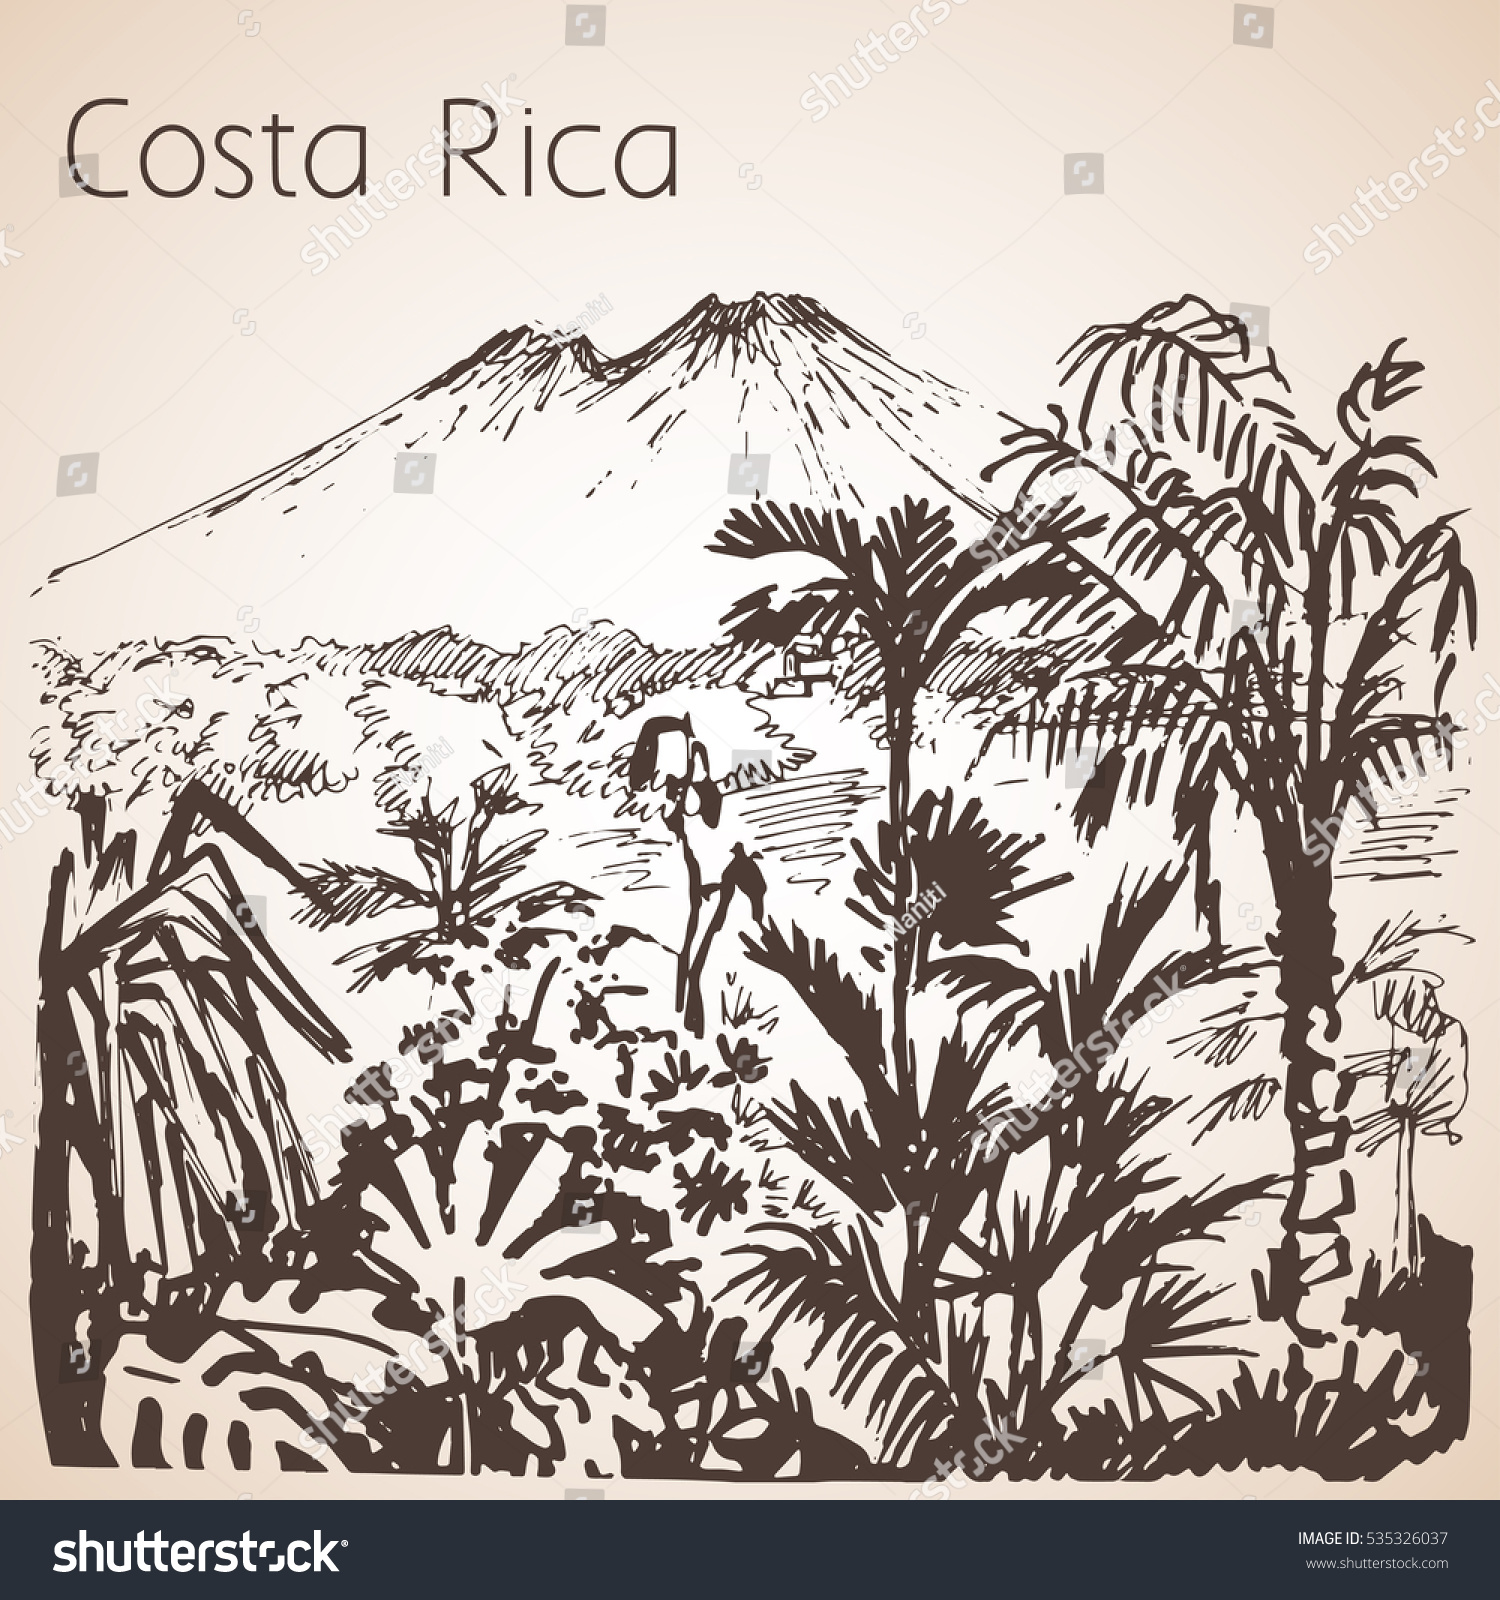 Costa Rica Hand Drawn Landscape Sketch Royalty Free Stock Vector 7469